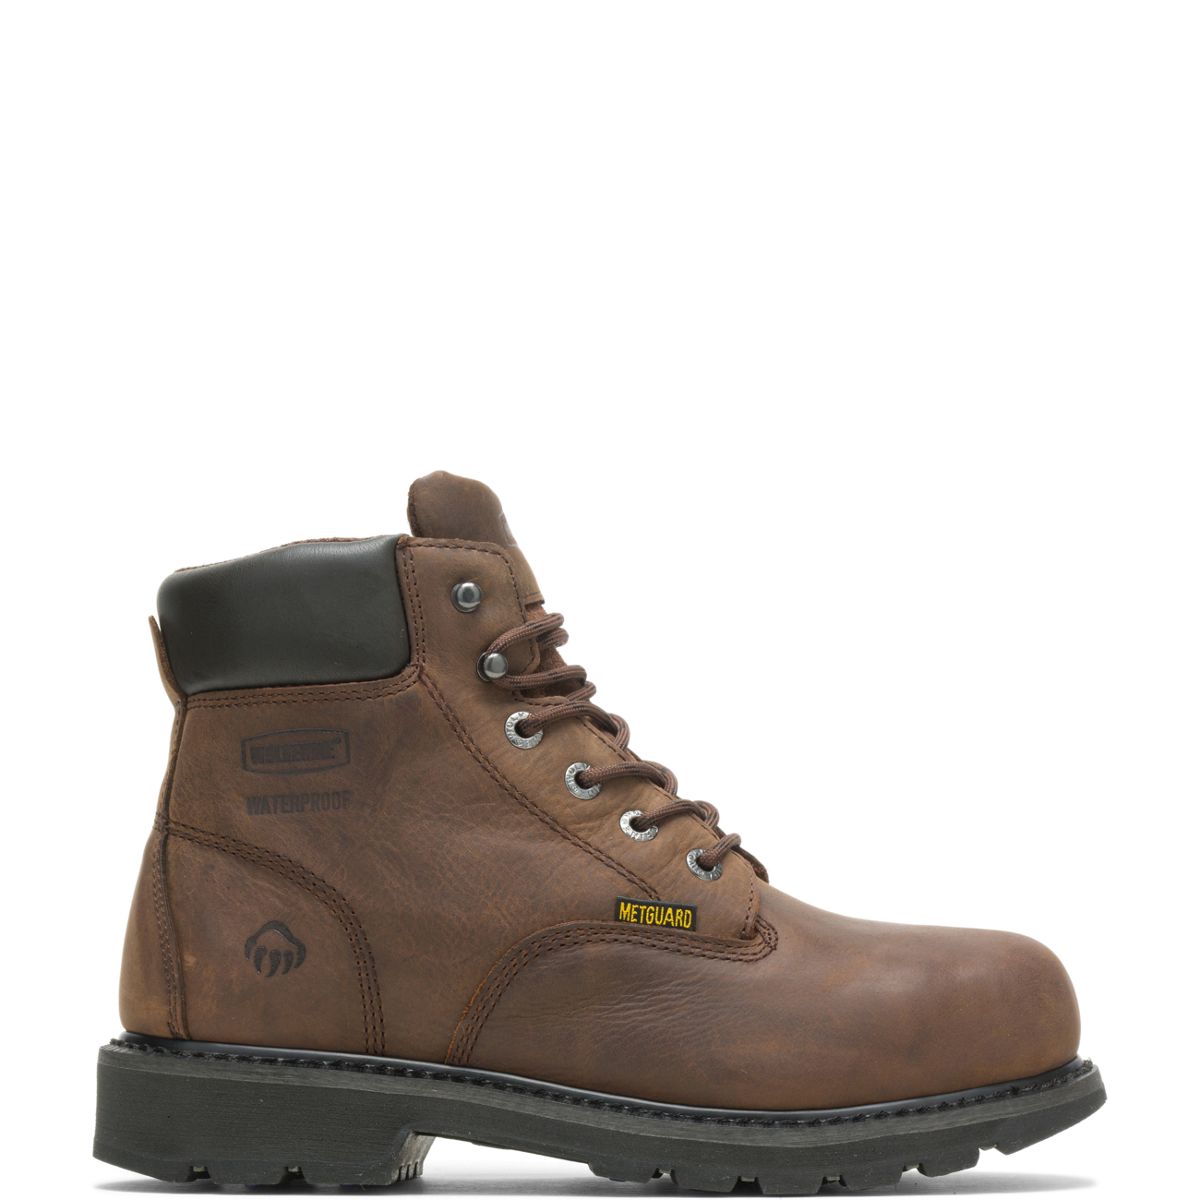 Steel Toe Work Boots & Safety Boots For Men | Wolverine